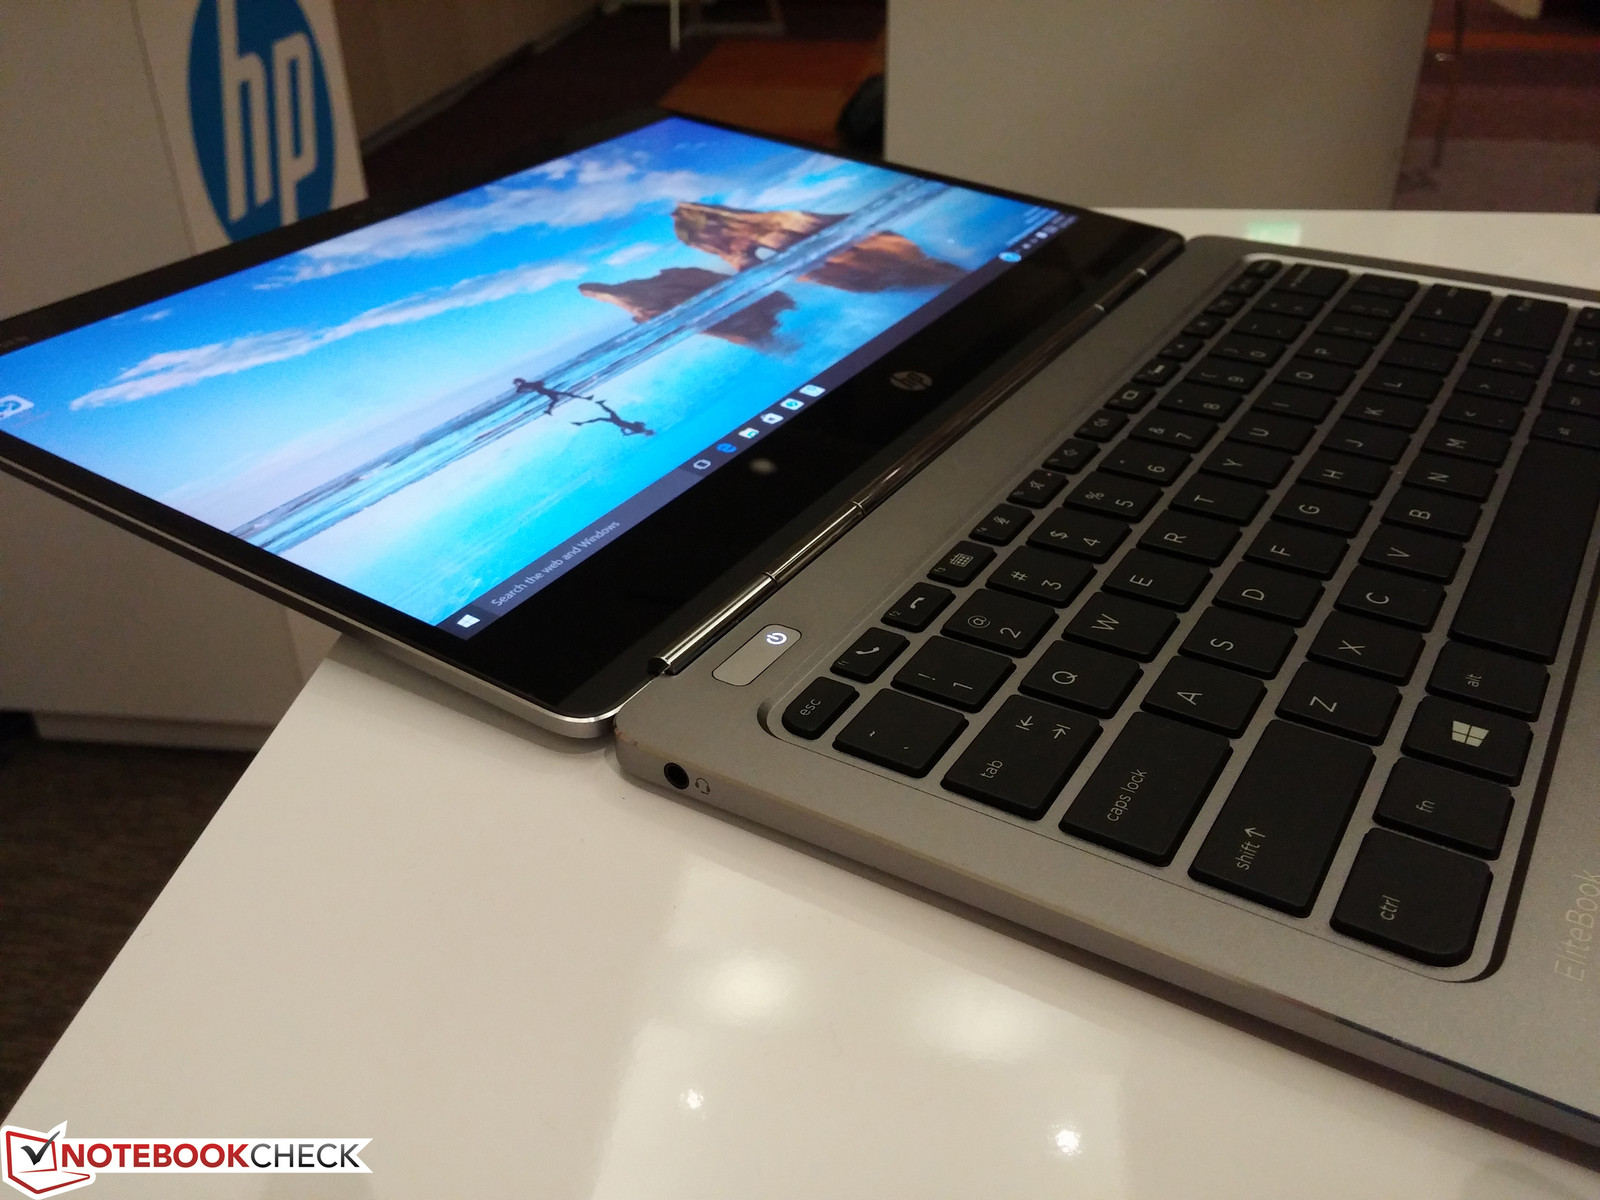 HP unveils EliteBook Folio G1 as world's lightest and thinnest business